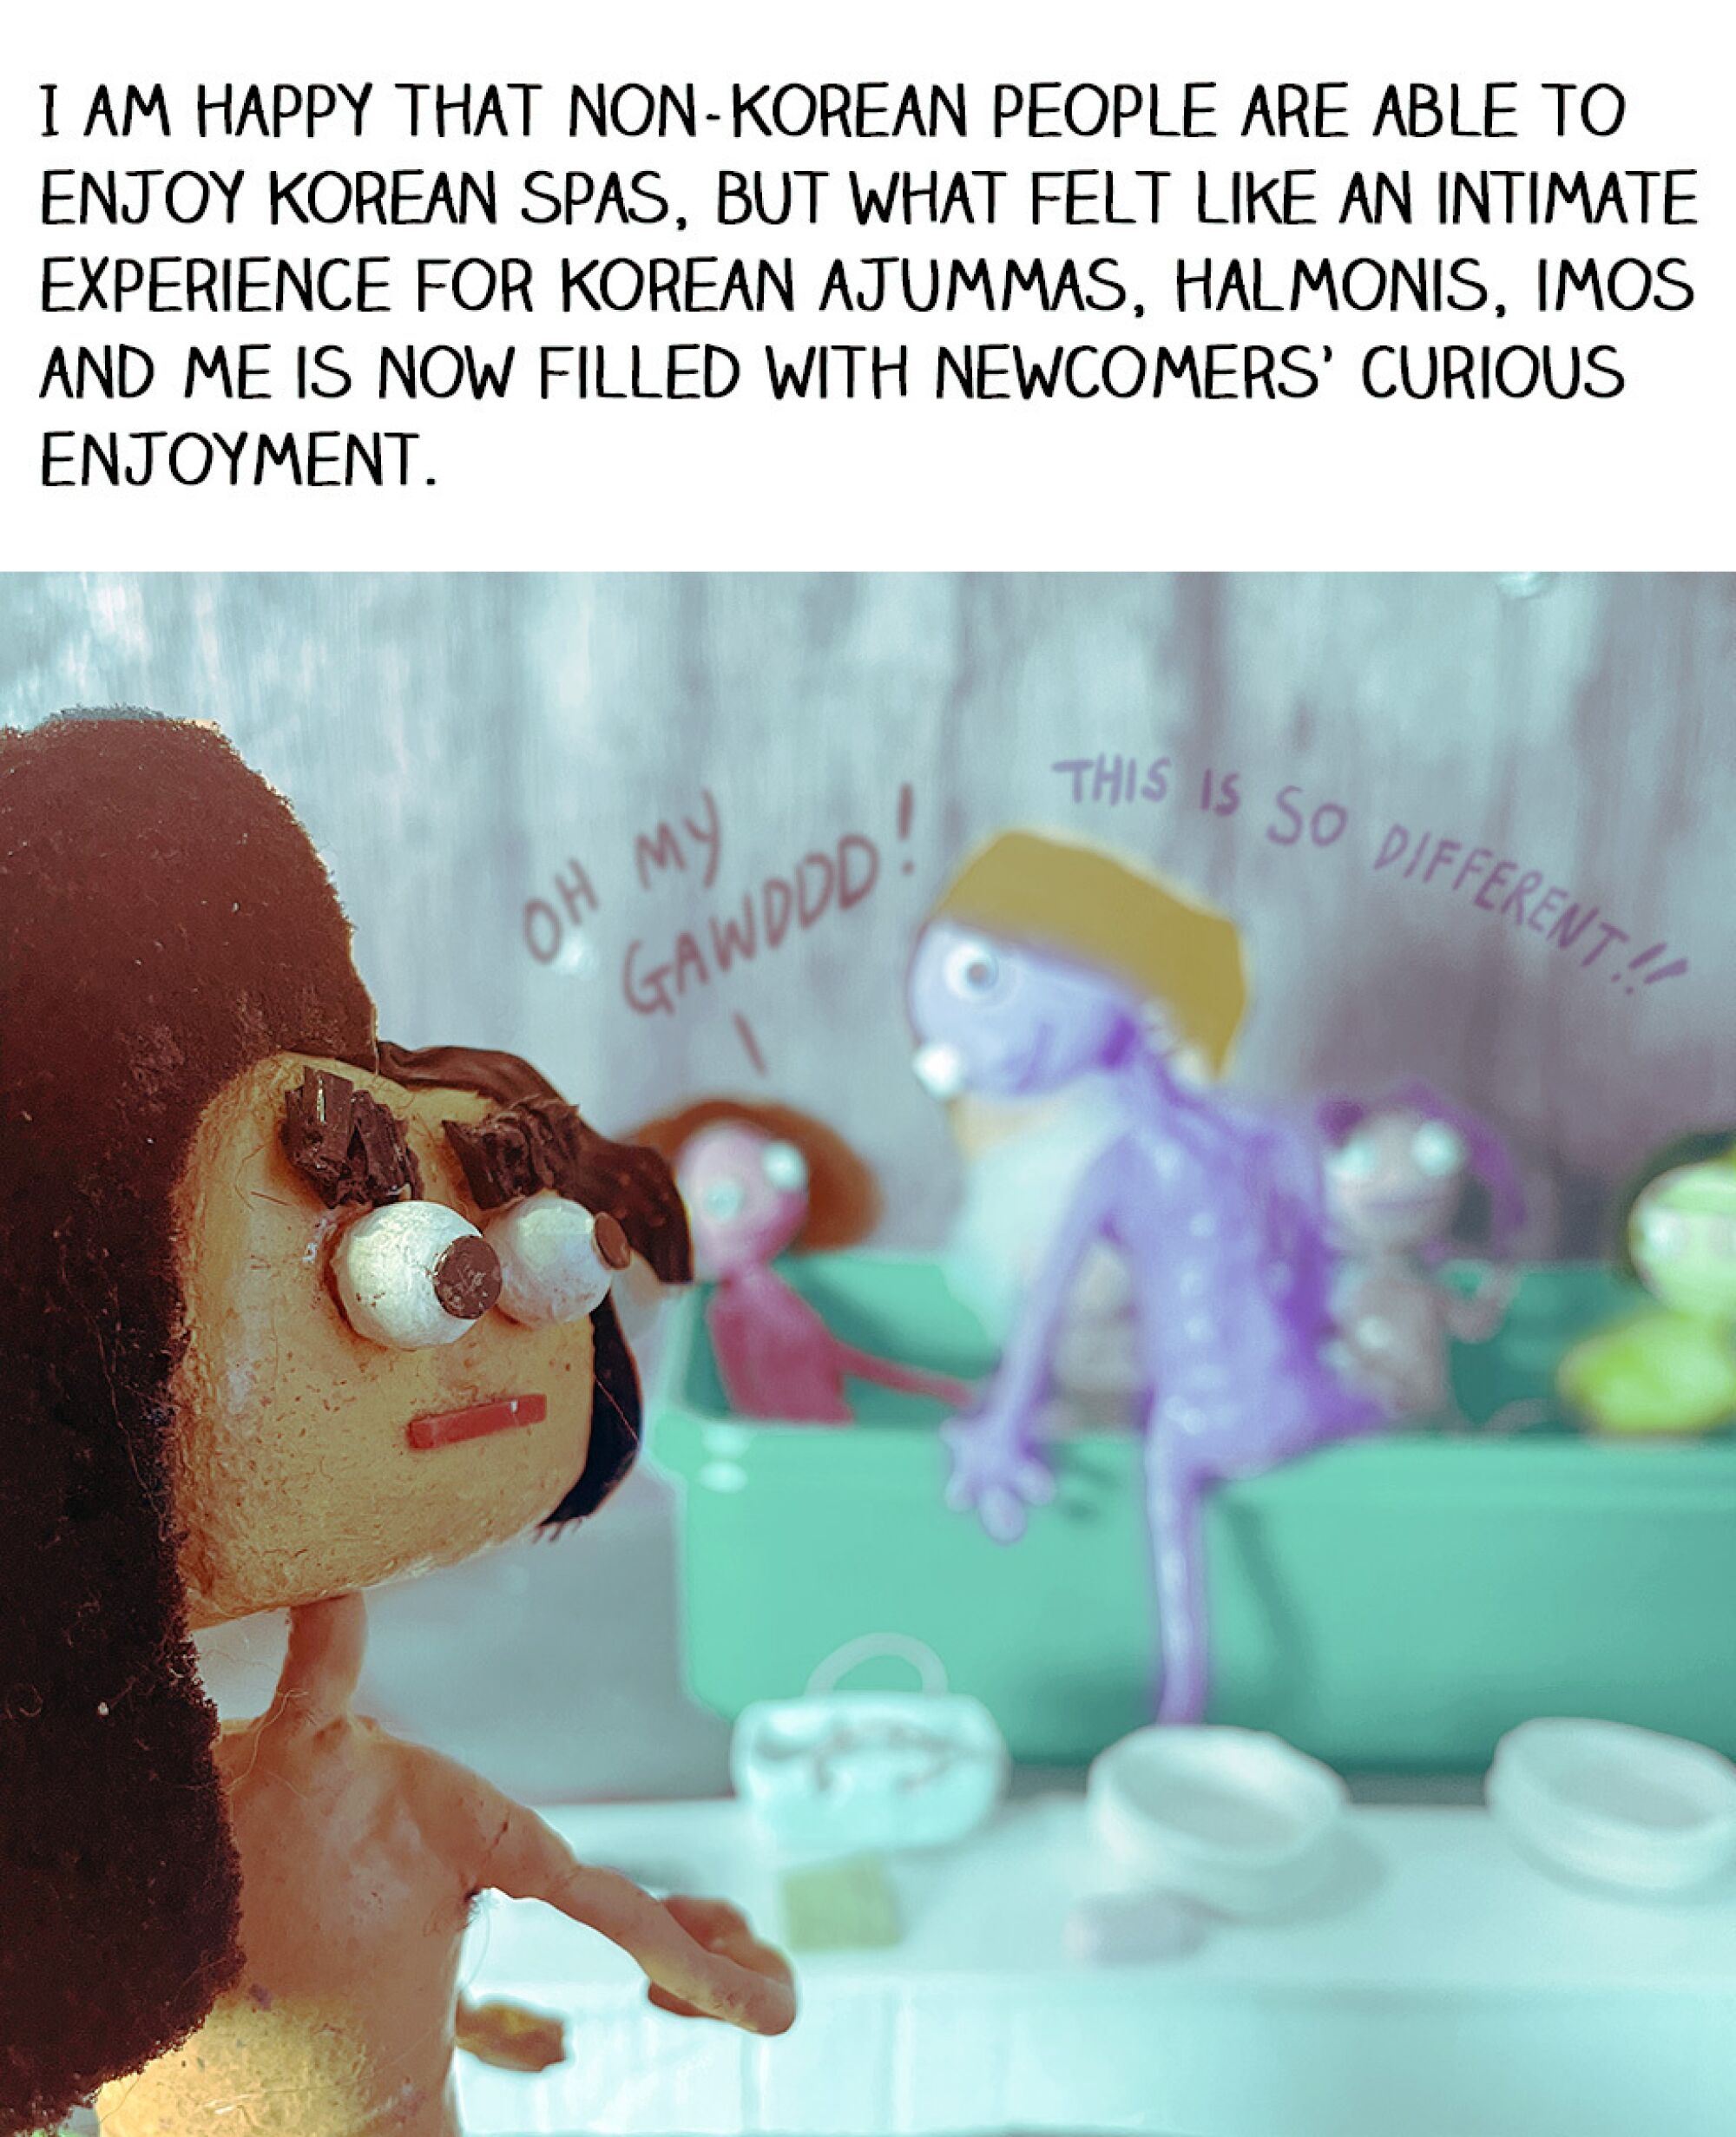 A photo of a Korean puppet looking at non-Korean puppets who are curious about the spa.